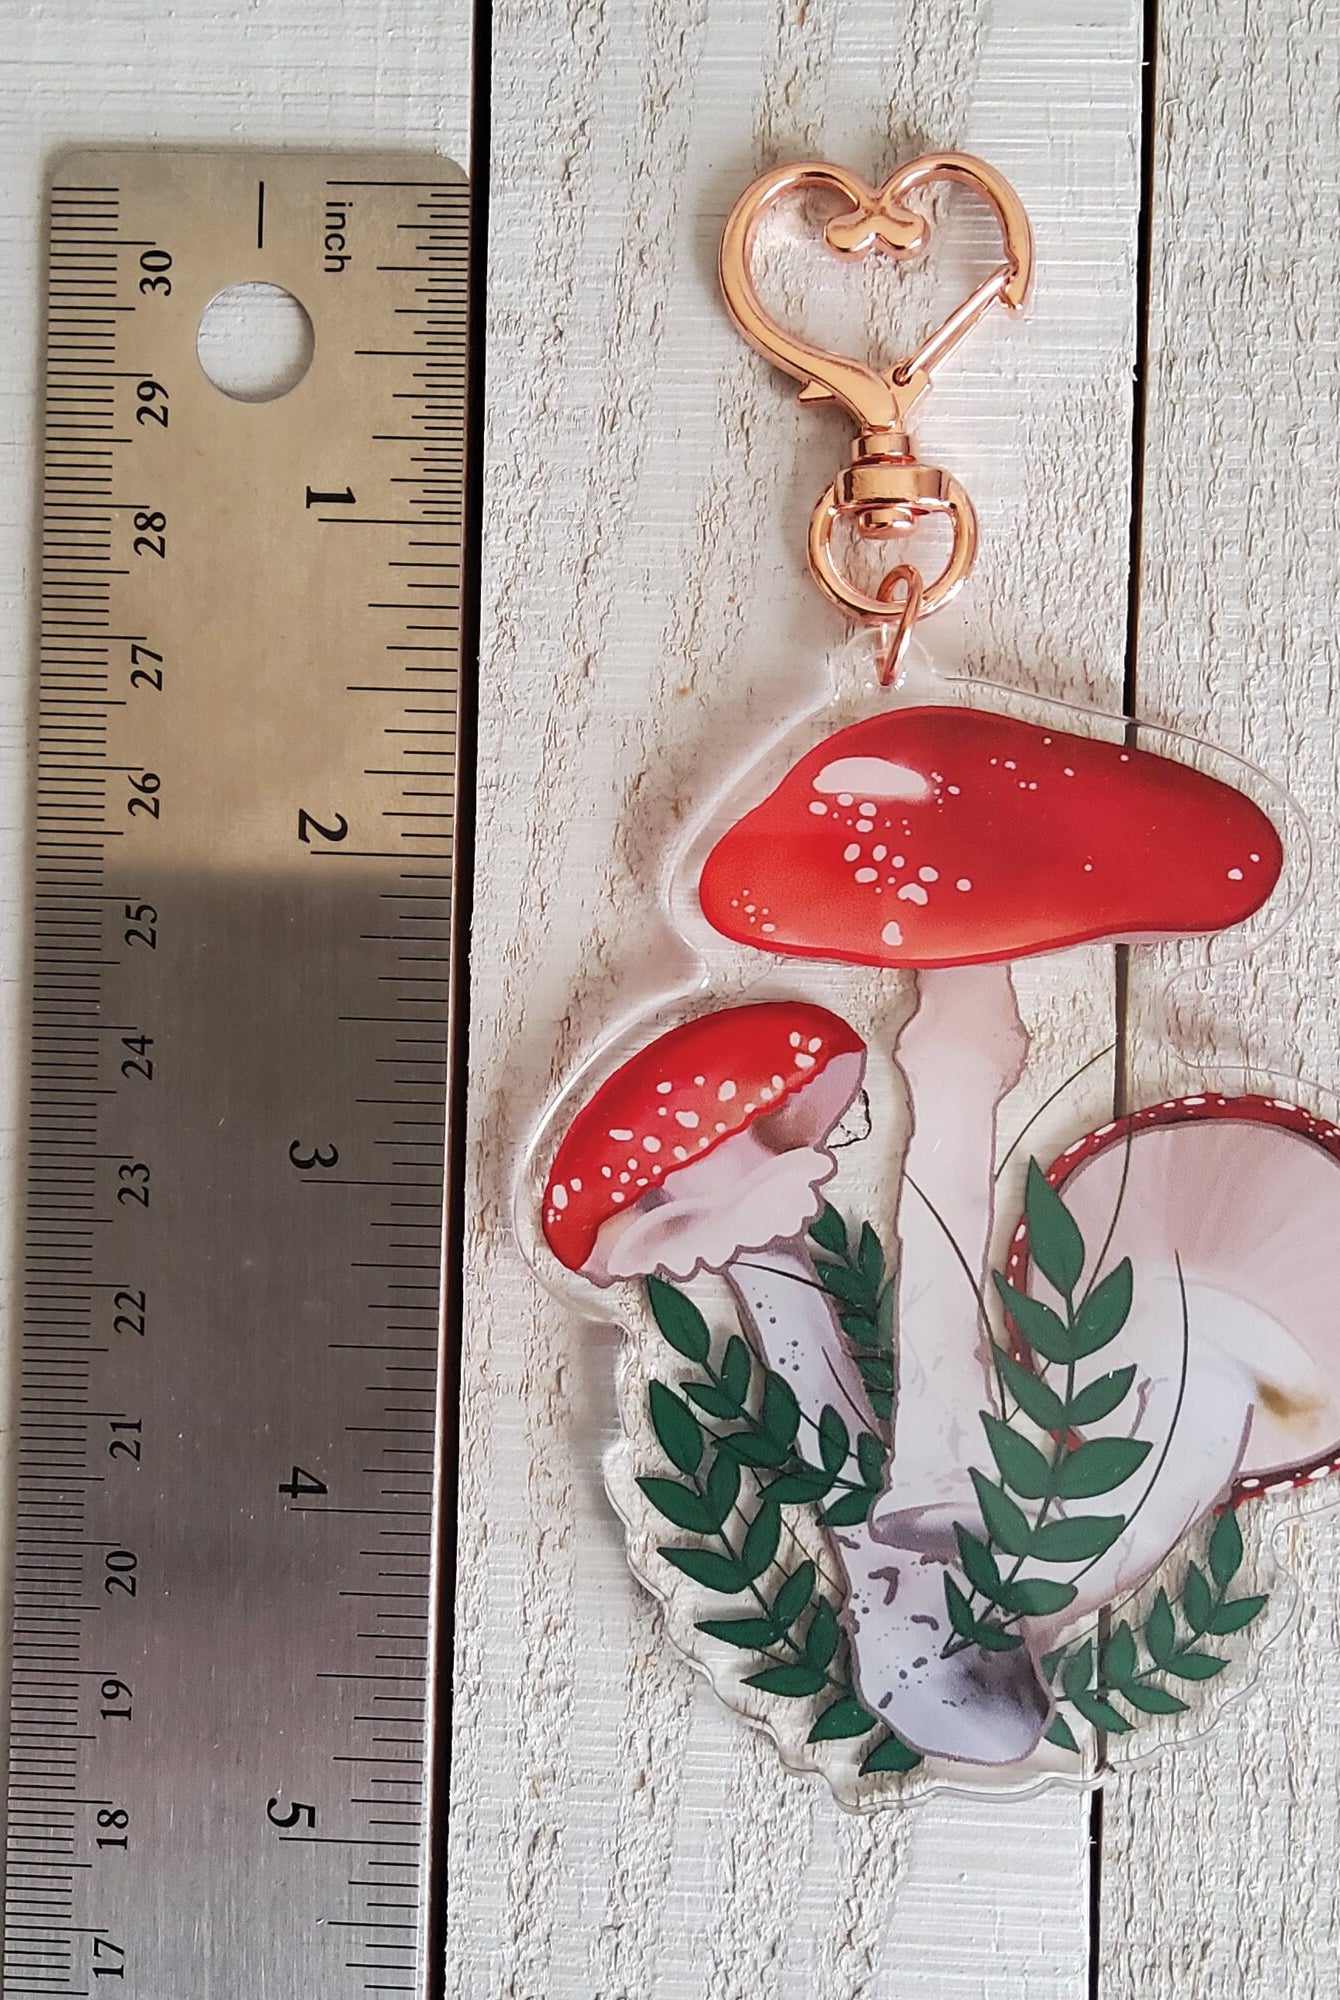 ACRYLIC CHARM Double Sided: Red Mushroom , Red Mushroom Charm , Mushroom Accessory , Red Mushroom Acrylic Accessory , Mushroom Charm